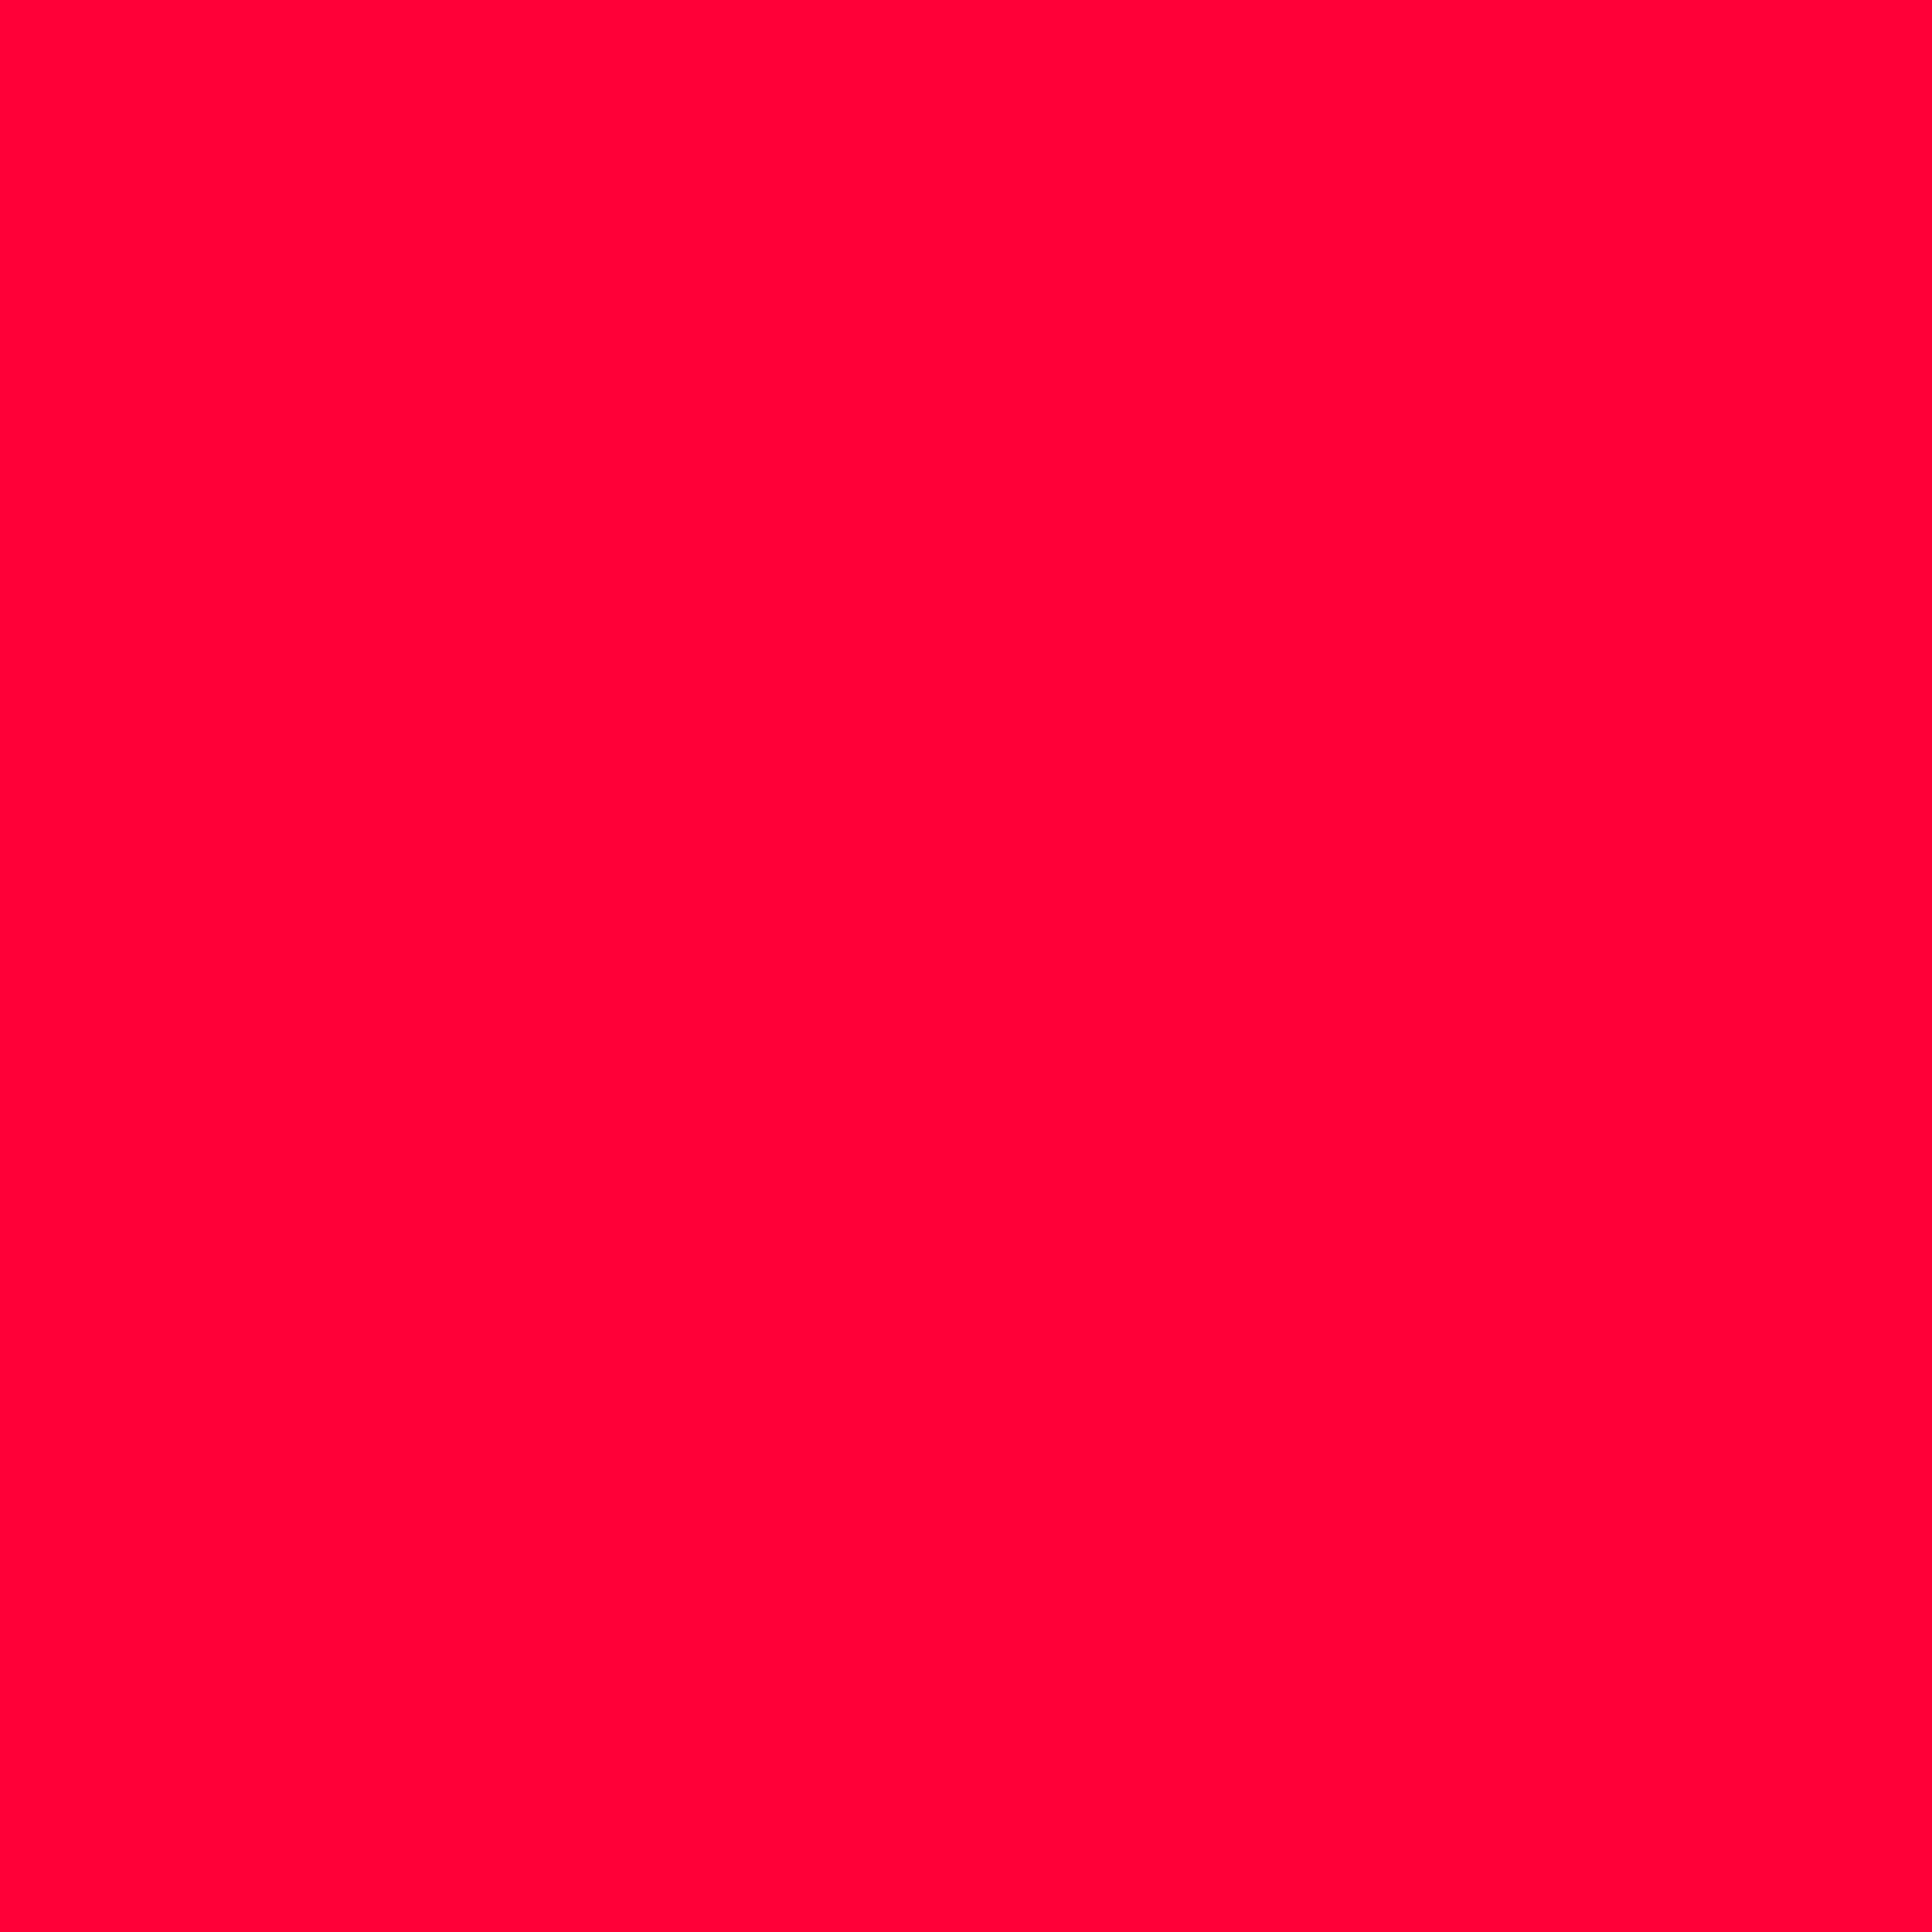 2732x2732 Carmine Red Solid Color Background